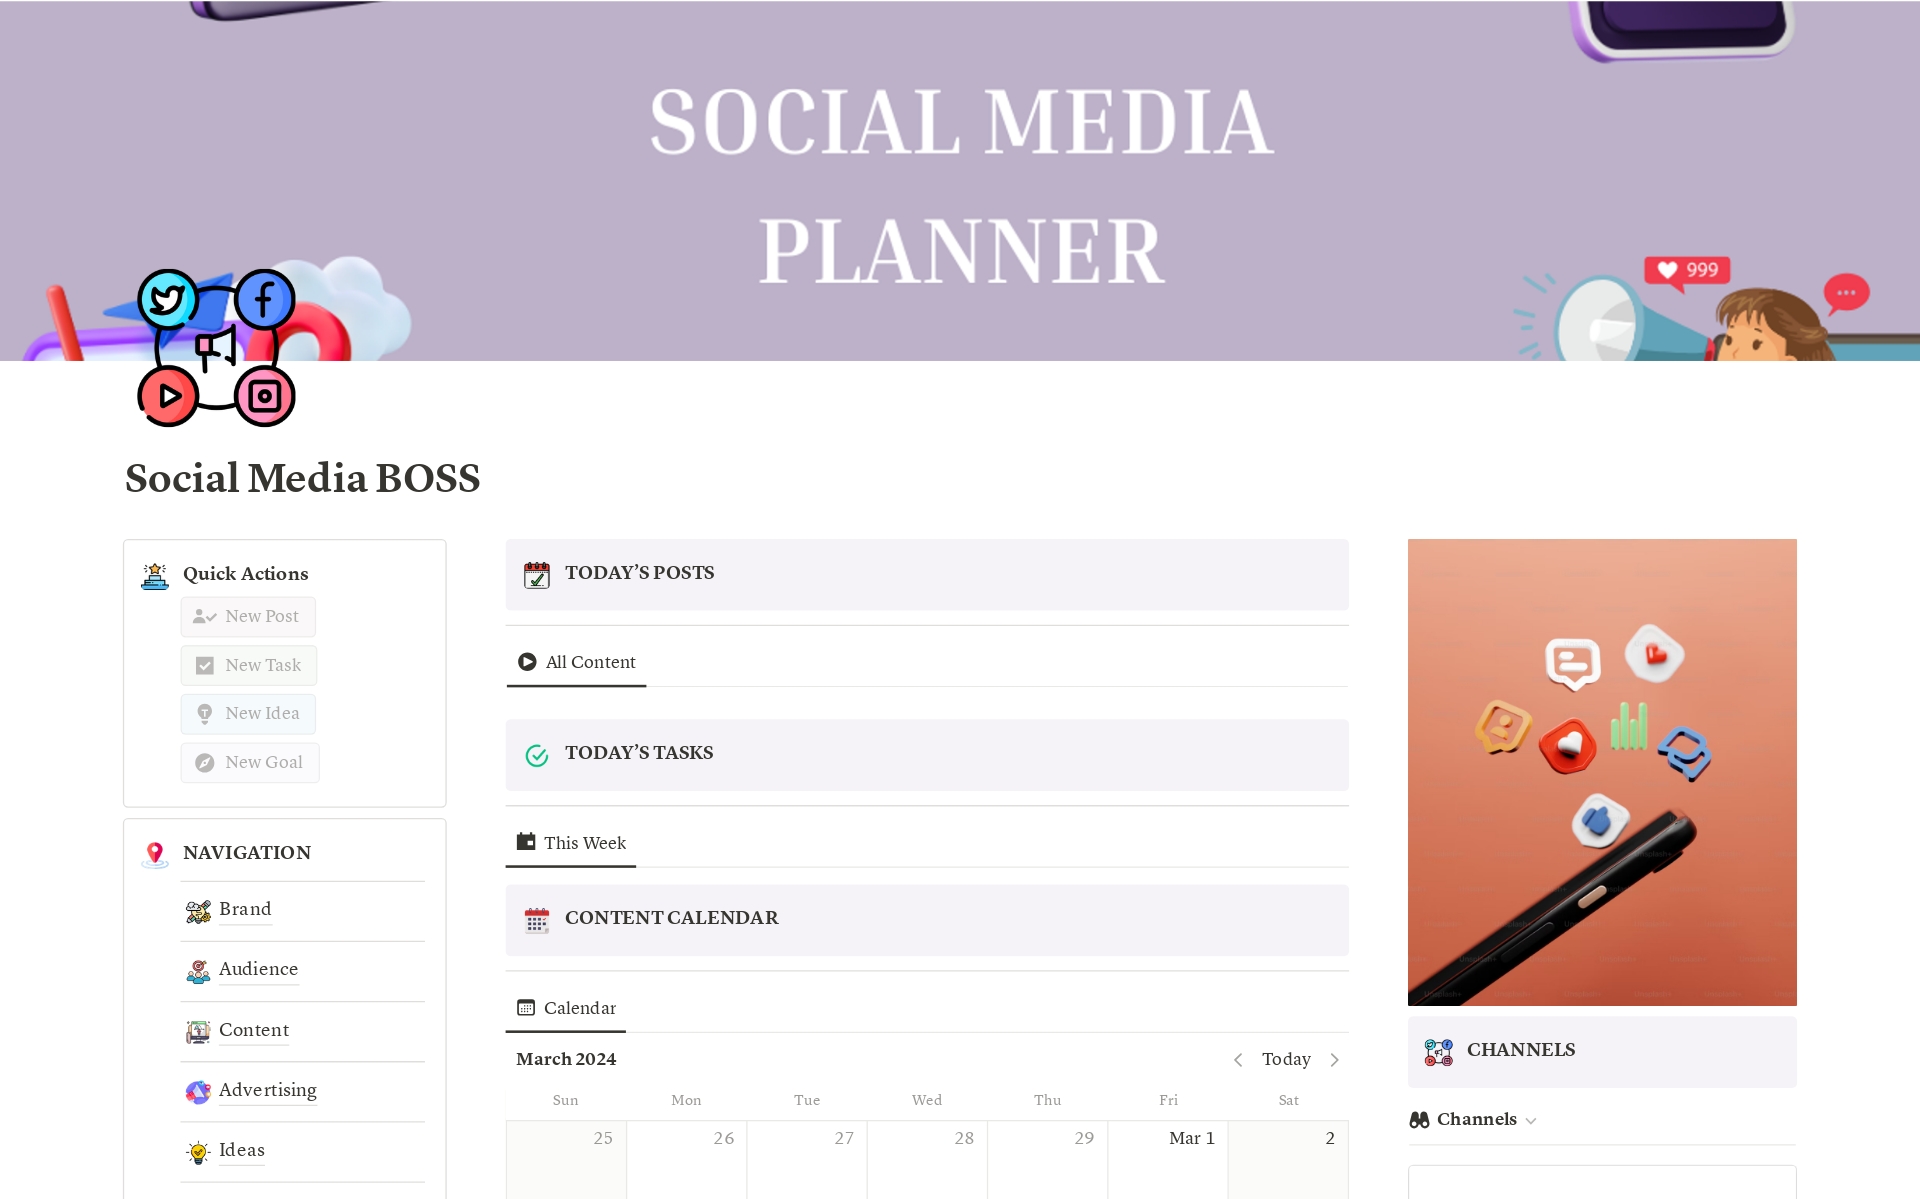 A very versatile Social Media Planner that can also be used as a Content Planner and a Content Calendar